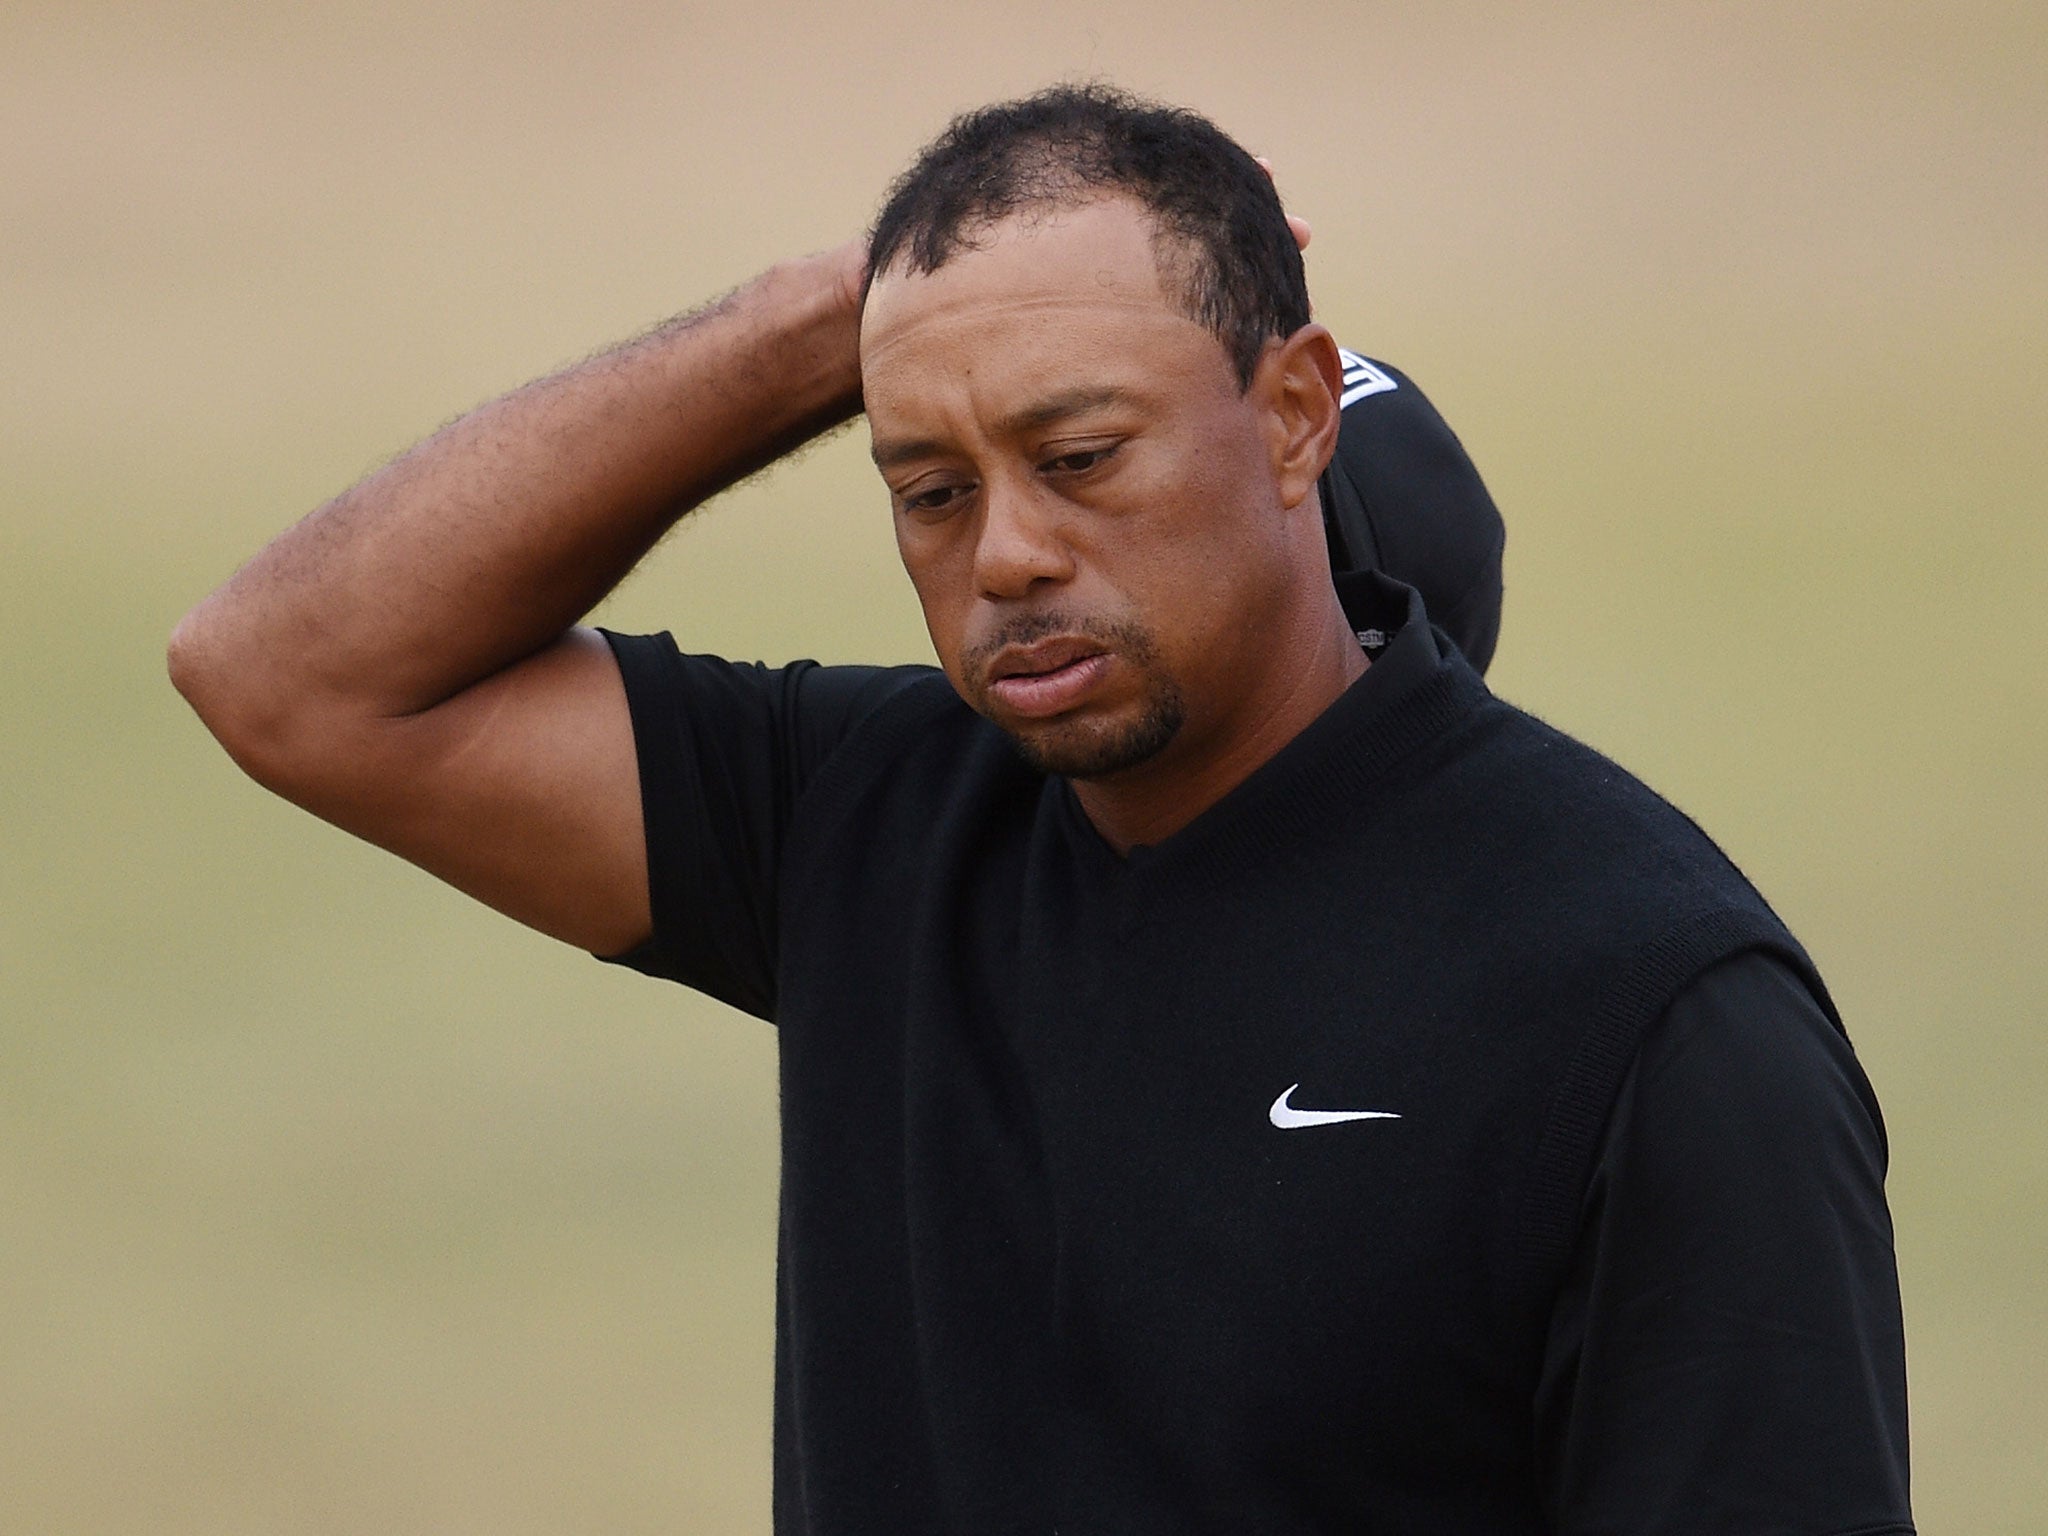 The public spectacle of players coping with the end of their careers can be painful. Putting his personal life to one side, watching Tiger Woods’ current struggle undermines the memories of when he dominated the world of golf.